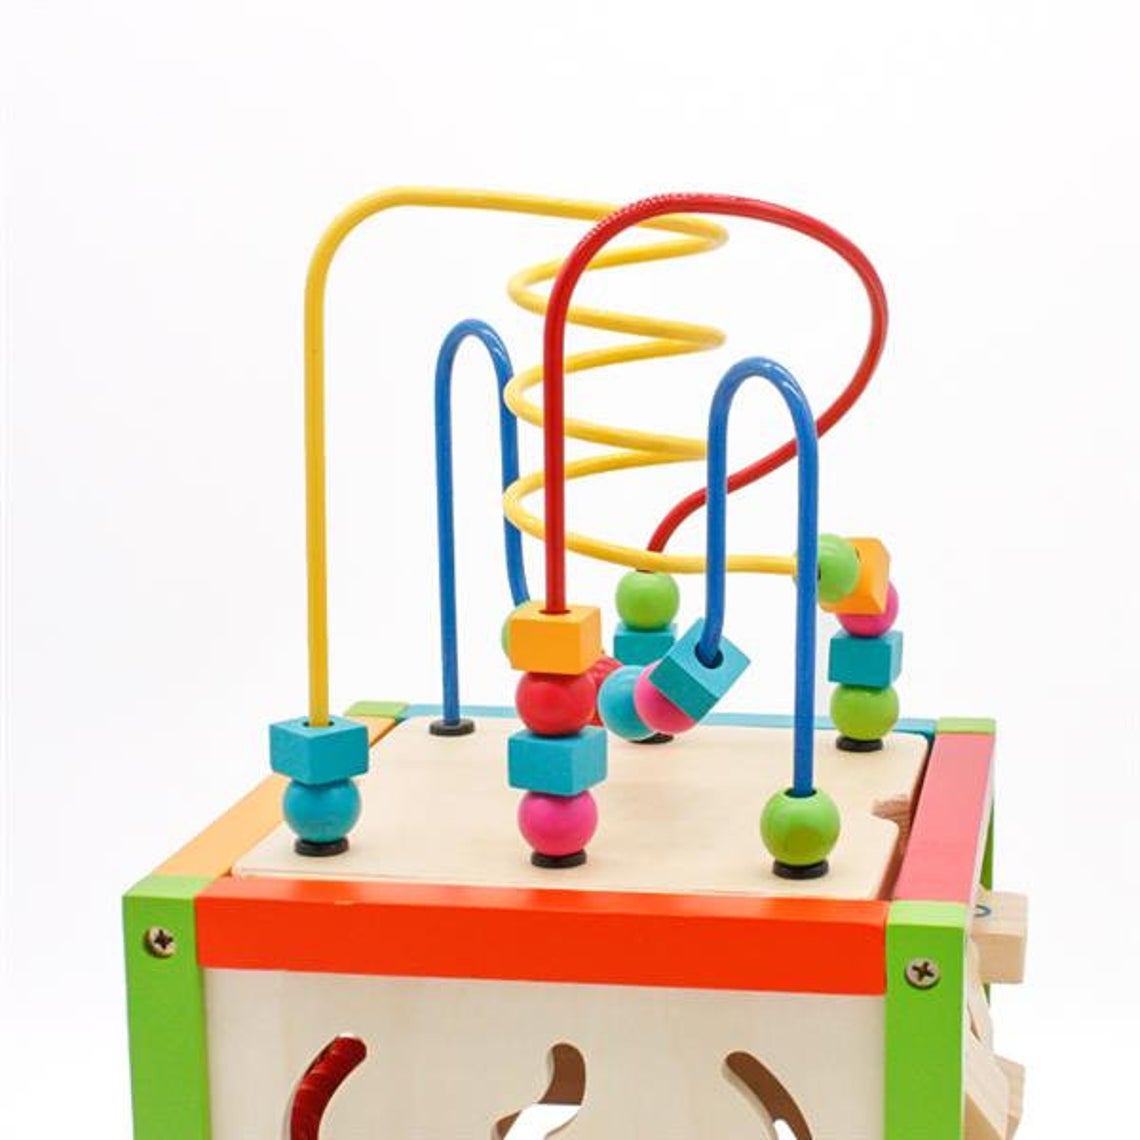 Wooden Learning Bead Maze Cube 5 in 1 Activity Center Educational Toy, gifts for 1 year old